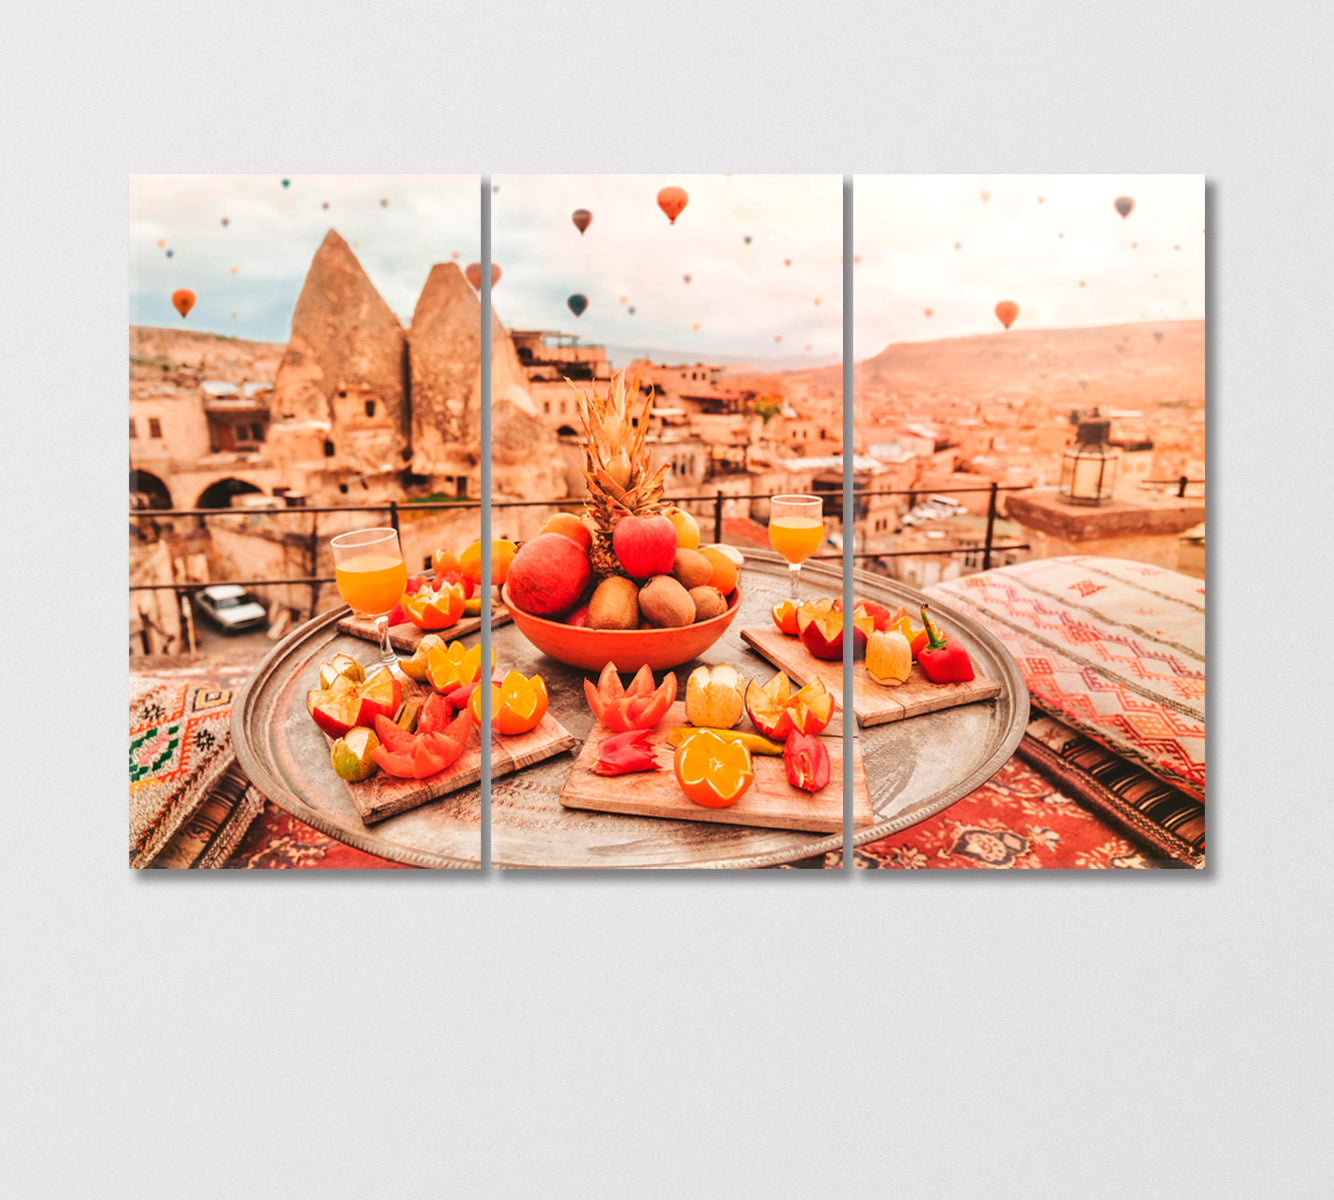 Turkish Breakfast with Cappadocia View and Flying Balloons Canvas Print-Canvas Print-CetArt-3 Panels-36x24 inches-CetArt